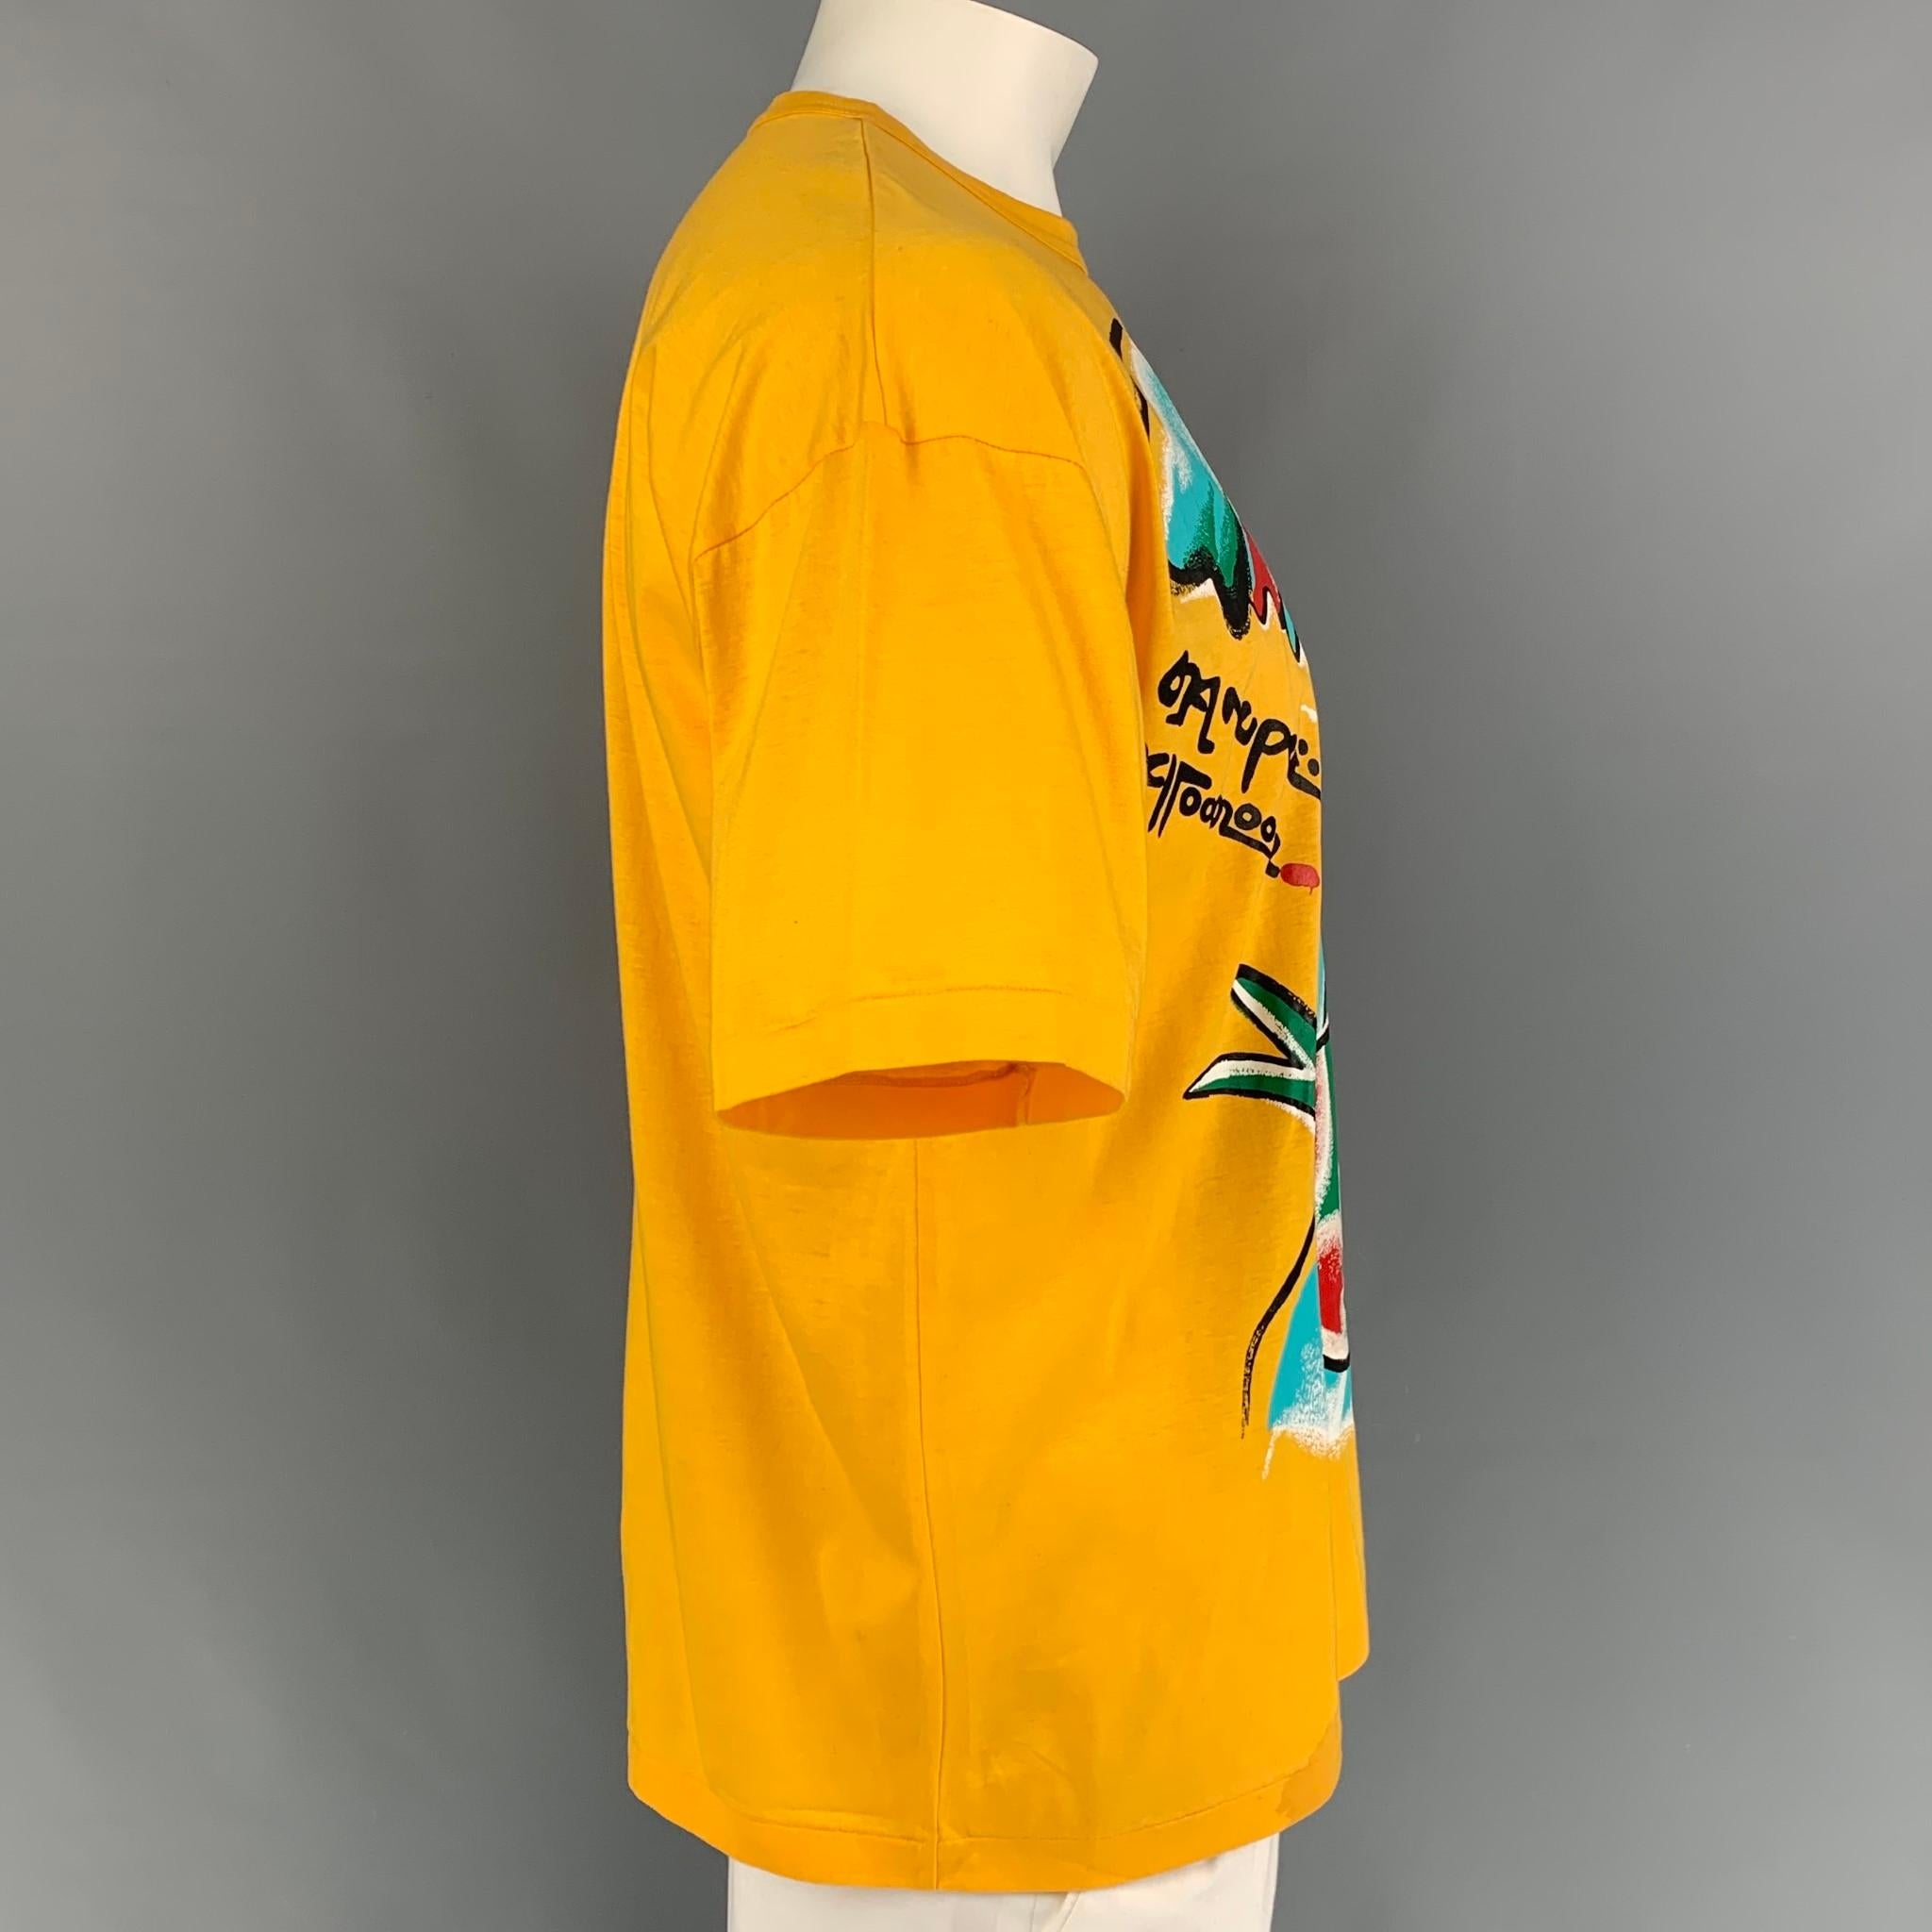 Vintage KANSAI YAMAMOTO t-shit comes in a yellow cotton with a graphic design featuring a crew-neck. Includes tags. Made in Japan. 

Very Good Pre-Owned Condition. Small mark at bottom.
Marked: L

Measurements:

Shoulder: 24 in.
Chest: 46